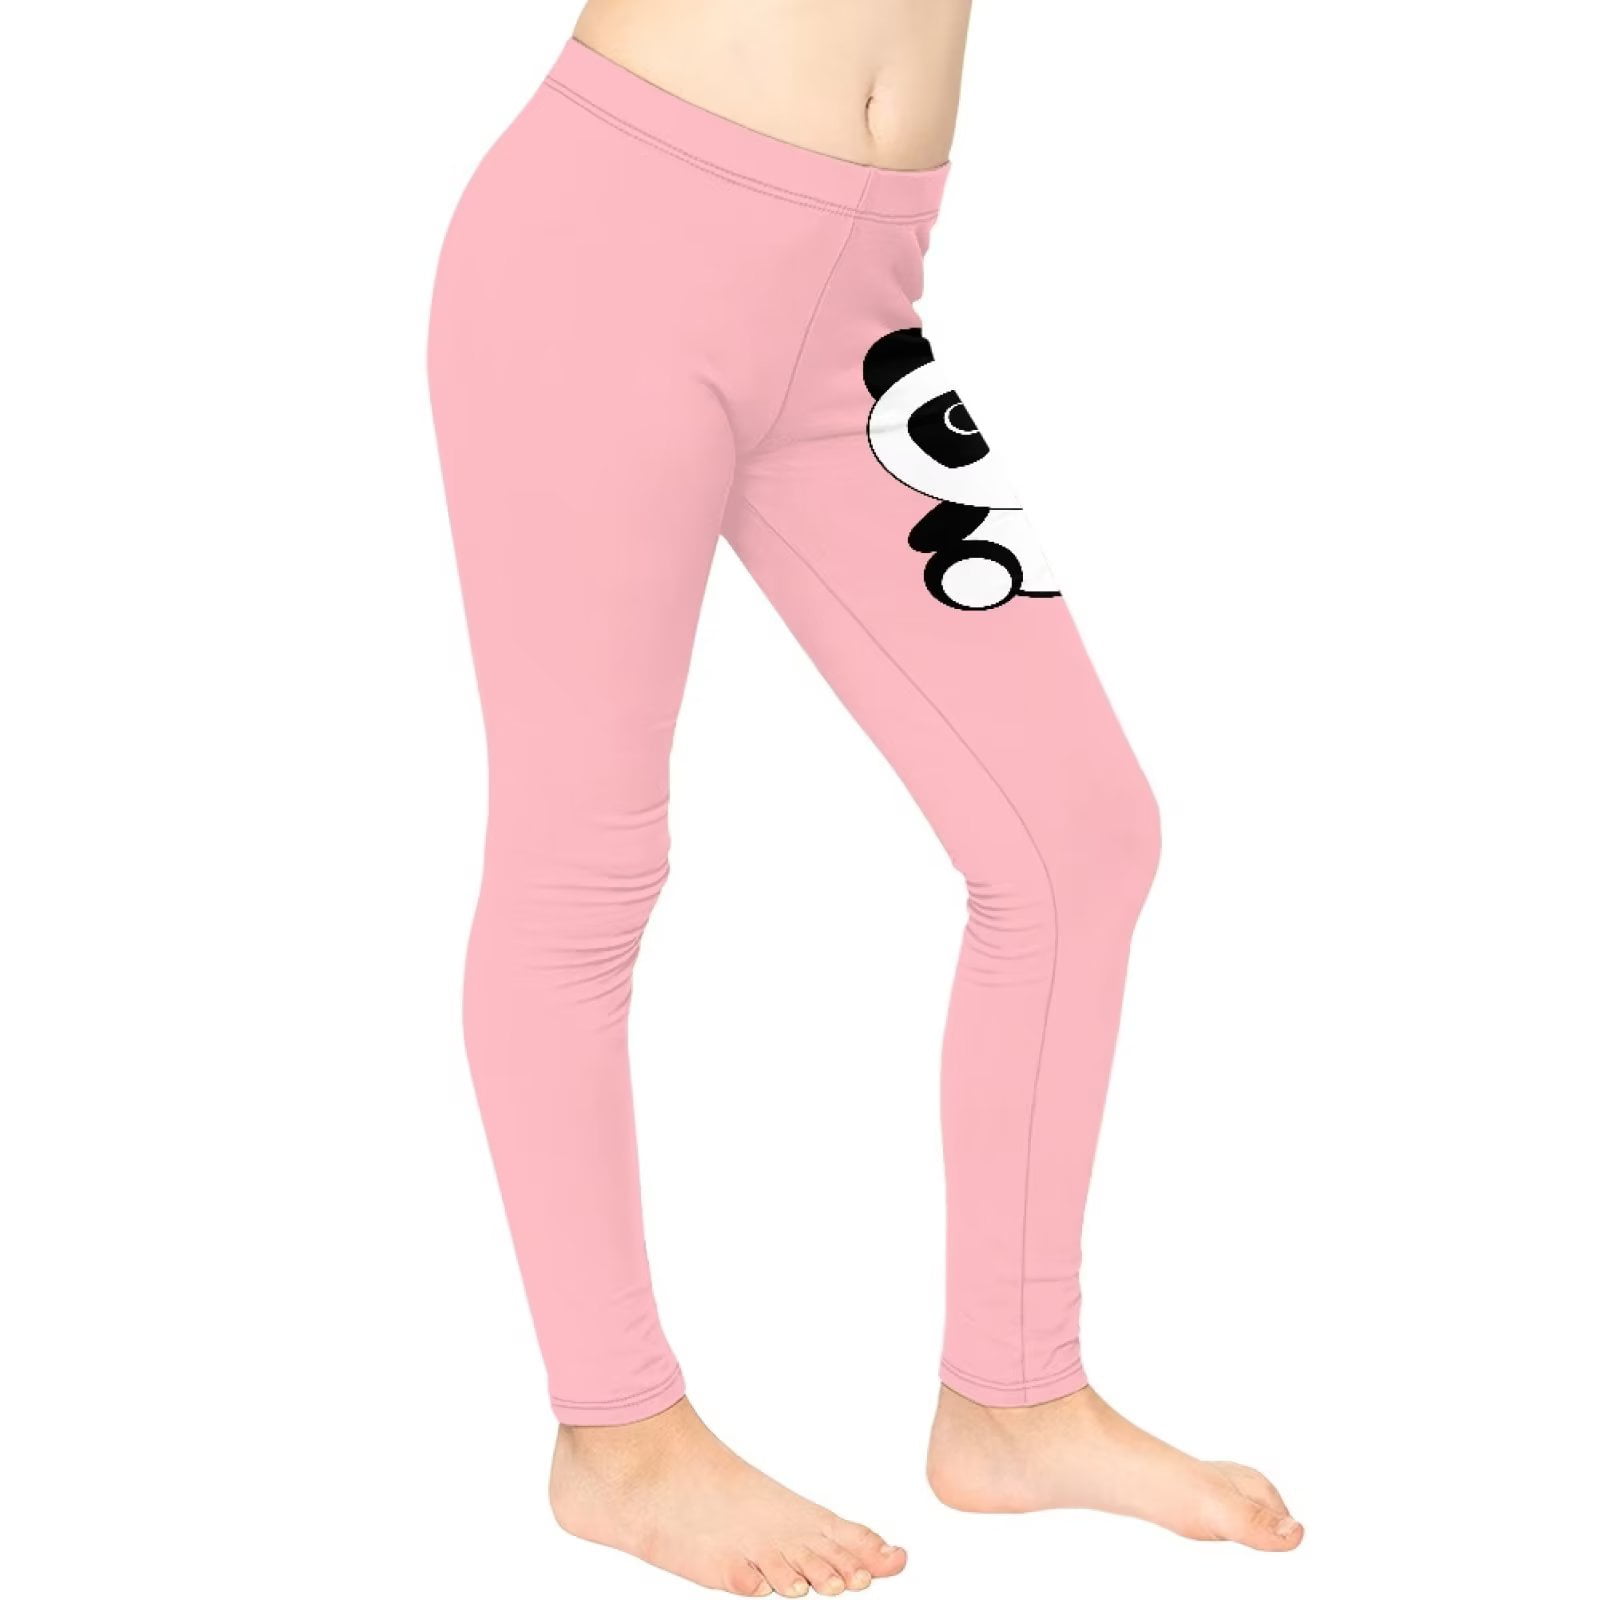 FKELYI Girls Leggings Pink with Panda Print Size 12-13 Years Comfortable  School Yoga Pants High Waisted Straight Leg Casual Home Active Tights 